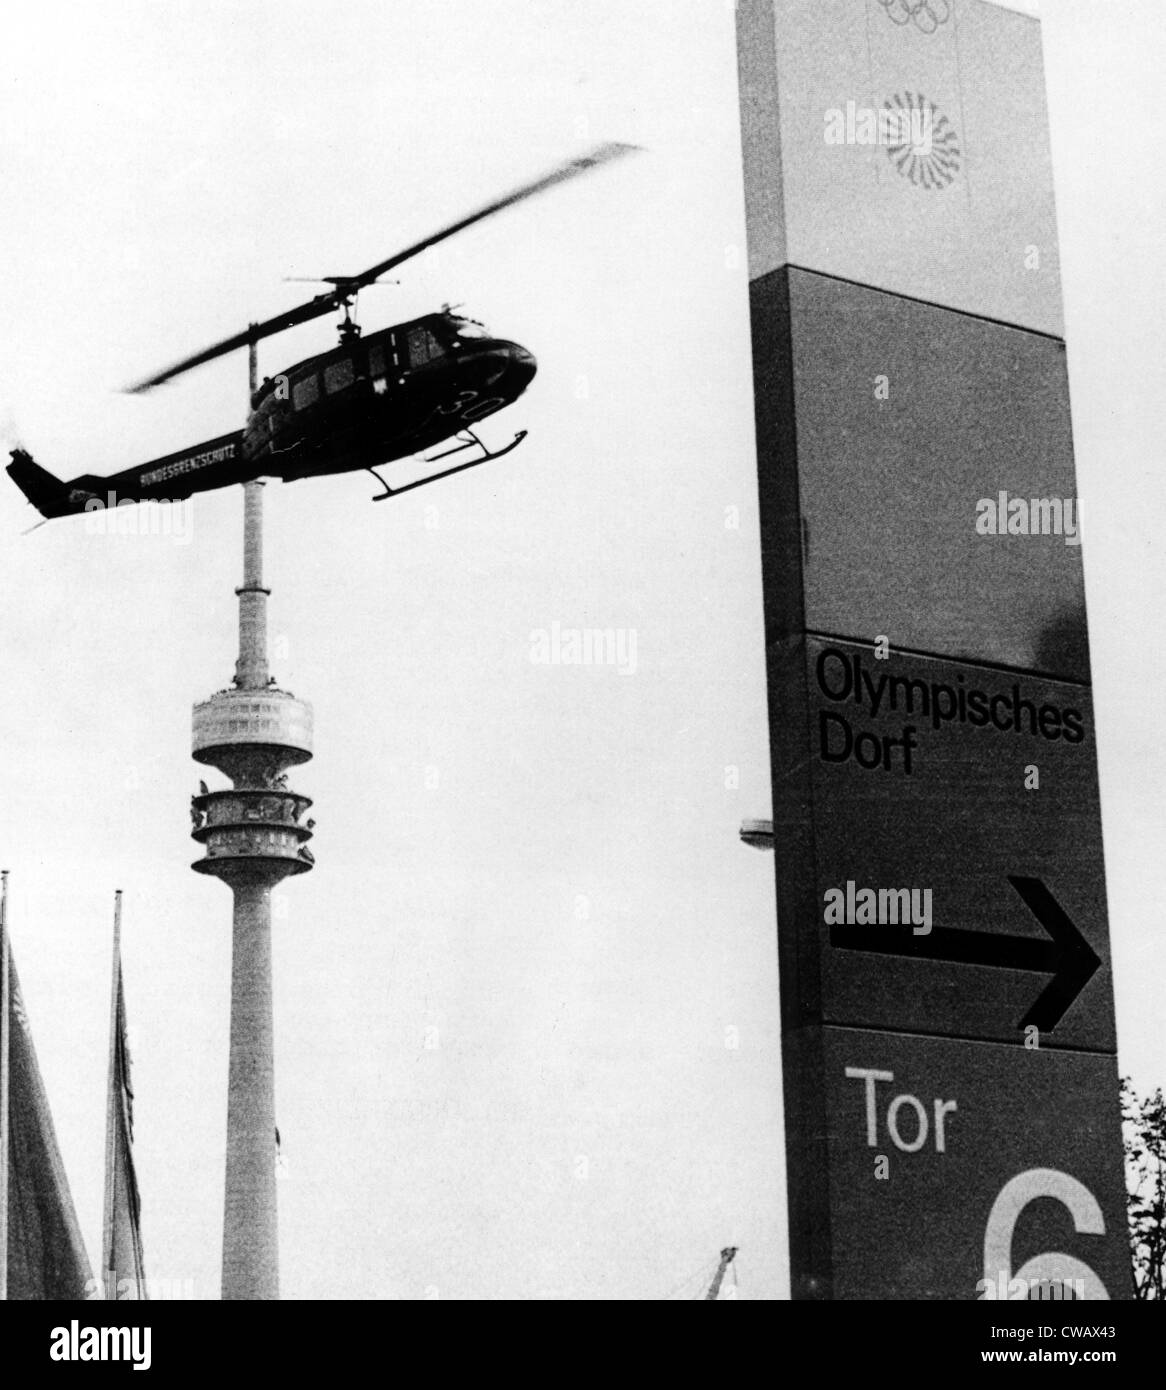 1972 Olympics, Helicopter, similar to one used to carry Arab Terrorists and Israeli Hostages to airport, Munich, Germany, Stock Photo